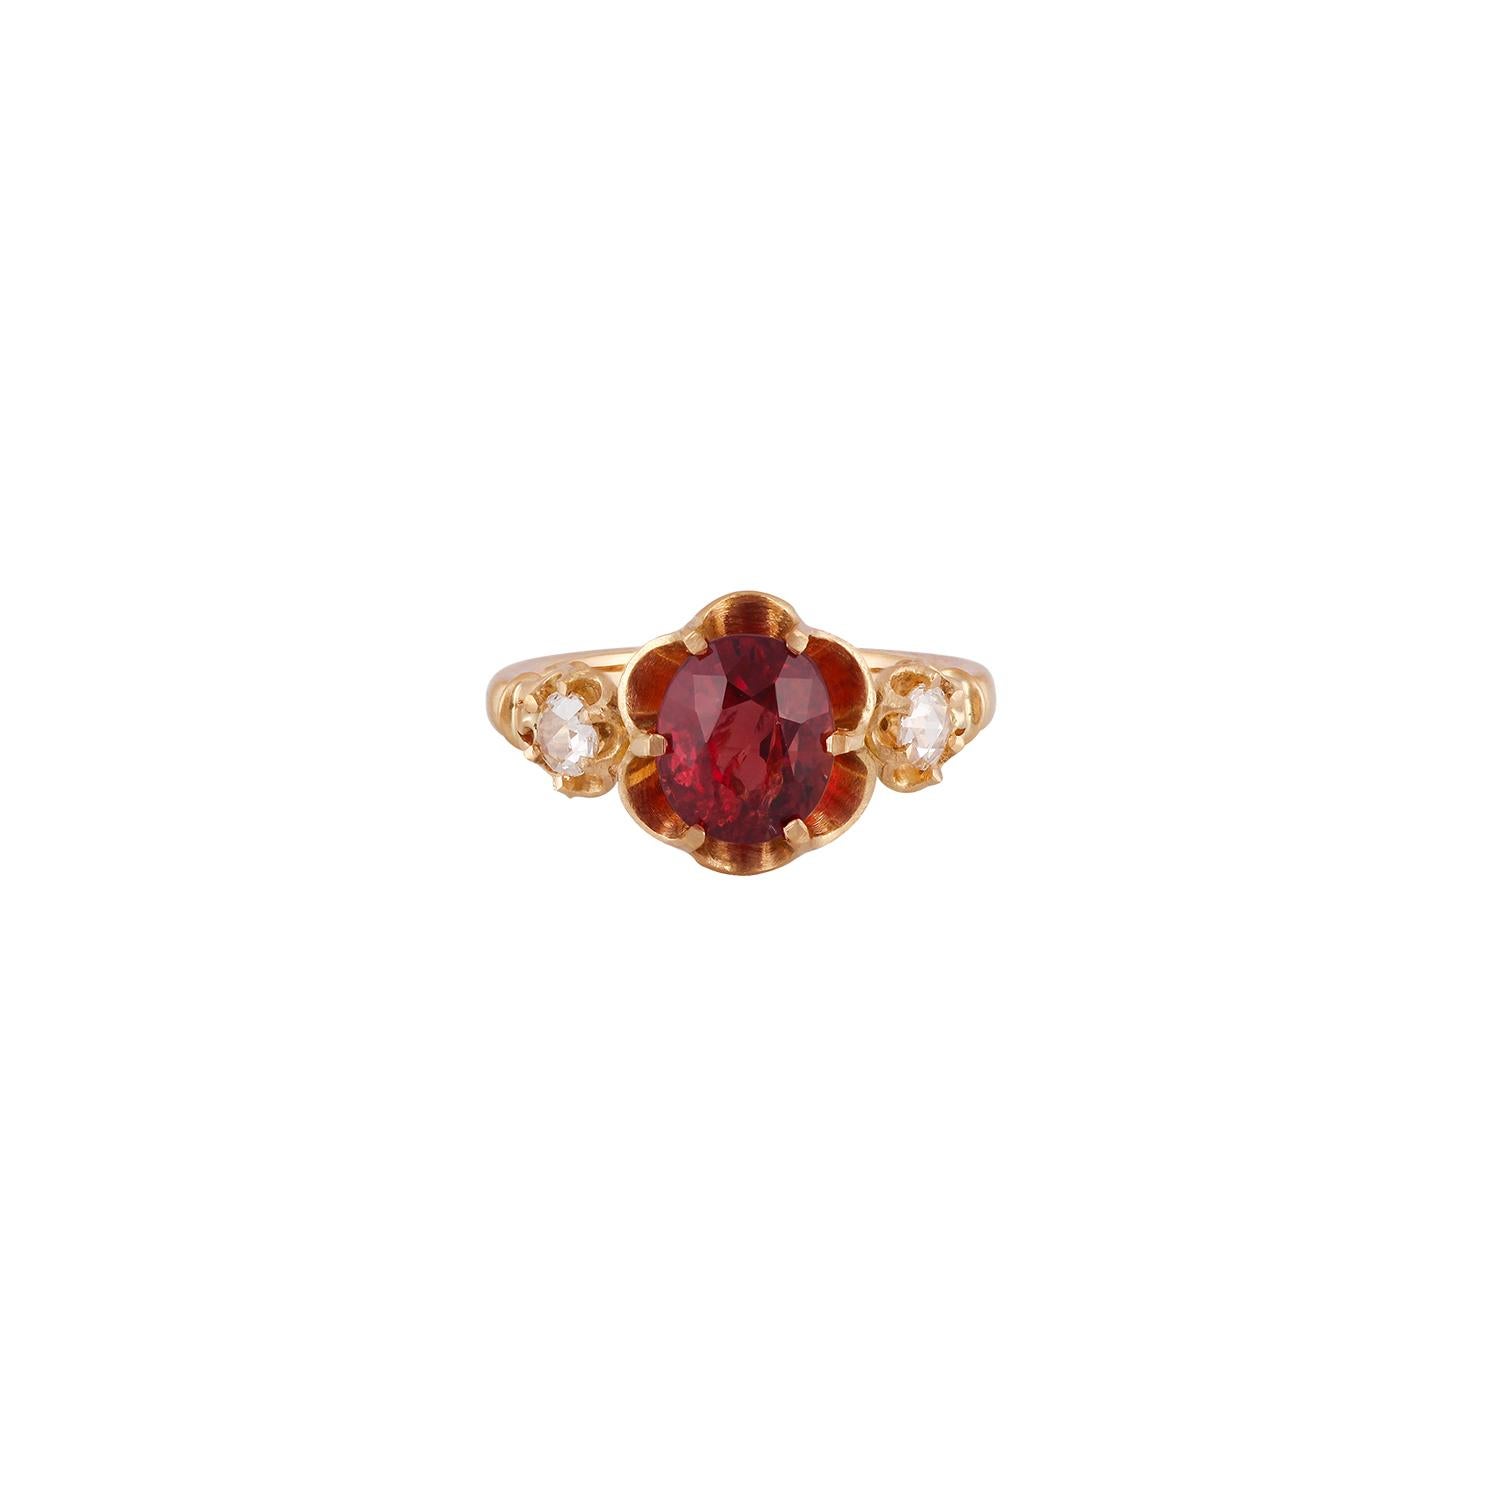 2.95 Carat Mozambique Ruby and Diamond  Ring in 18k Matte Finish Yellow Gold


Apart of our carefully curated collection, this ring proudly displays a 2.95 carat Mozambique ruby crowning a 18k  Matte Finish Yellow Gold. The ruby's prongs hold the